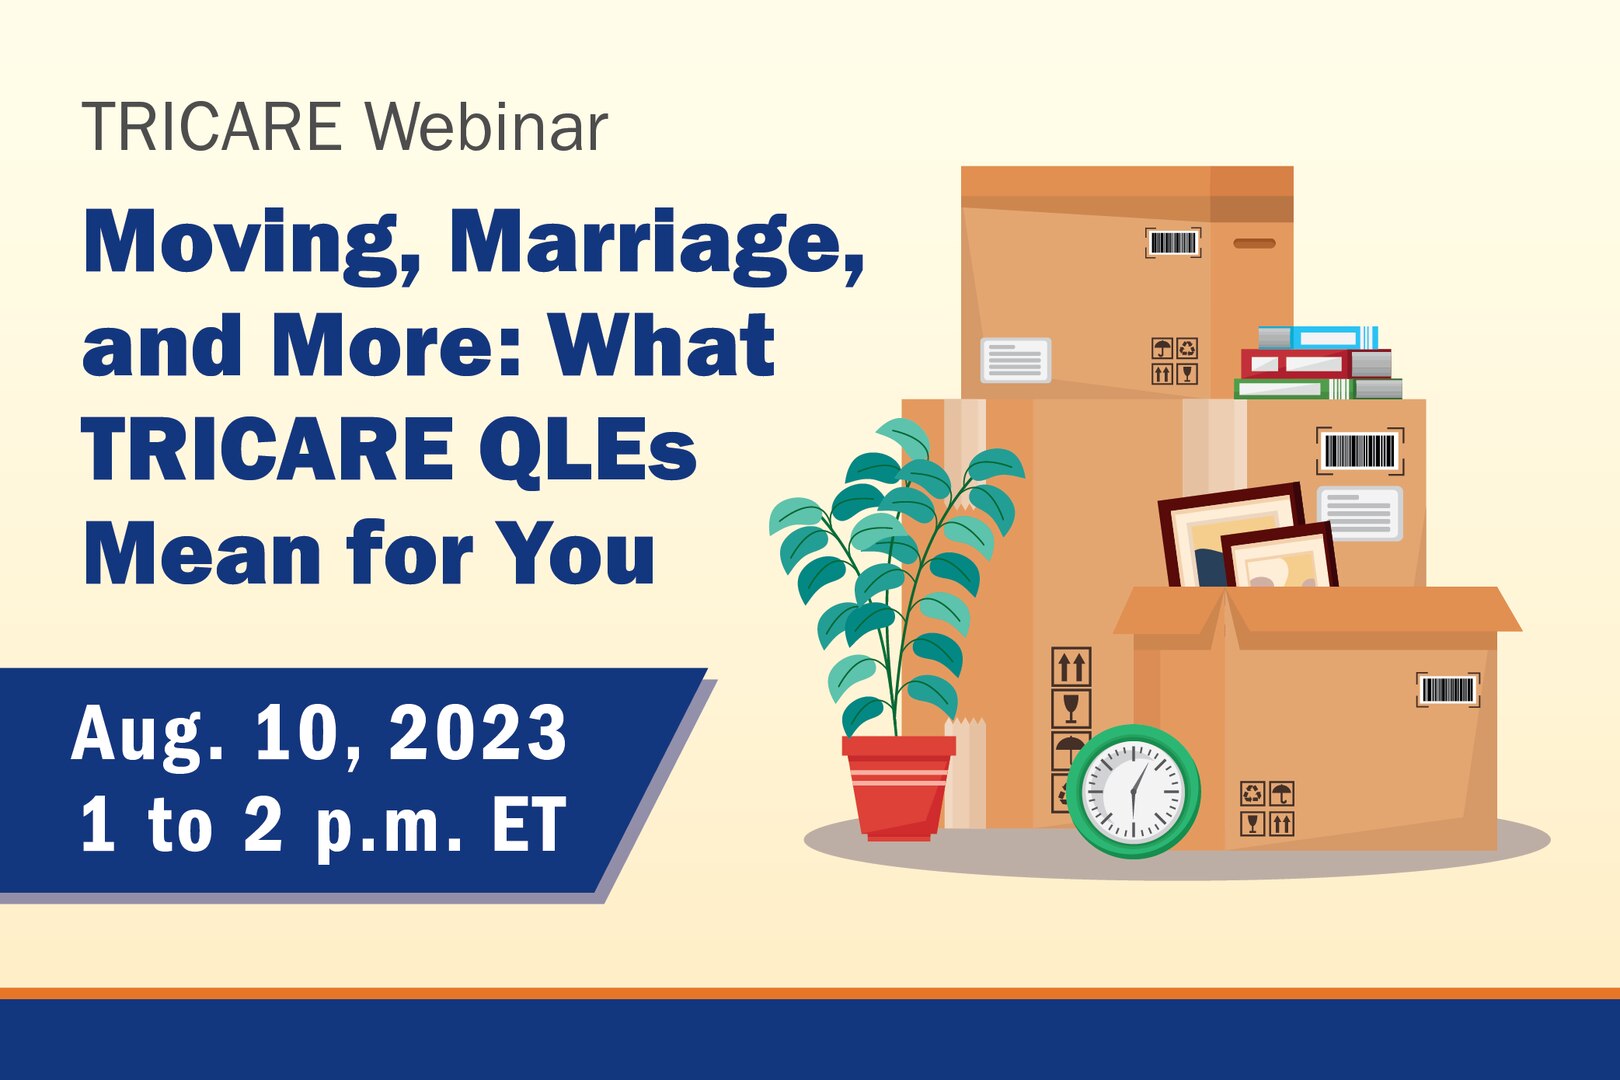 TRICARE Webinar. Moving, Marriage, and More: What TRICARE QLEs Mean for You. August 10, 2023. 1 to 2 pm ET.